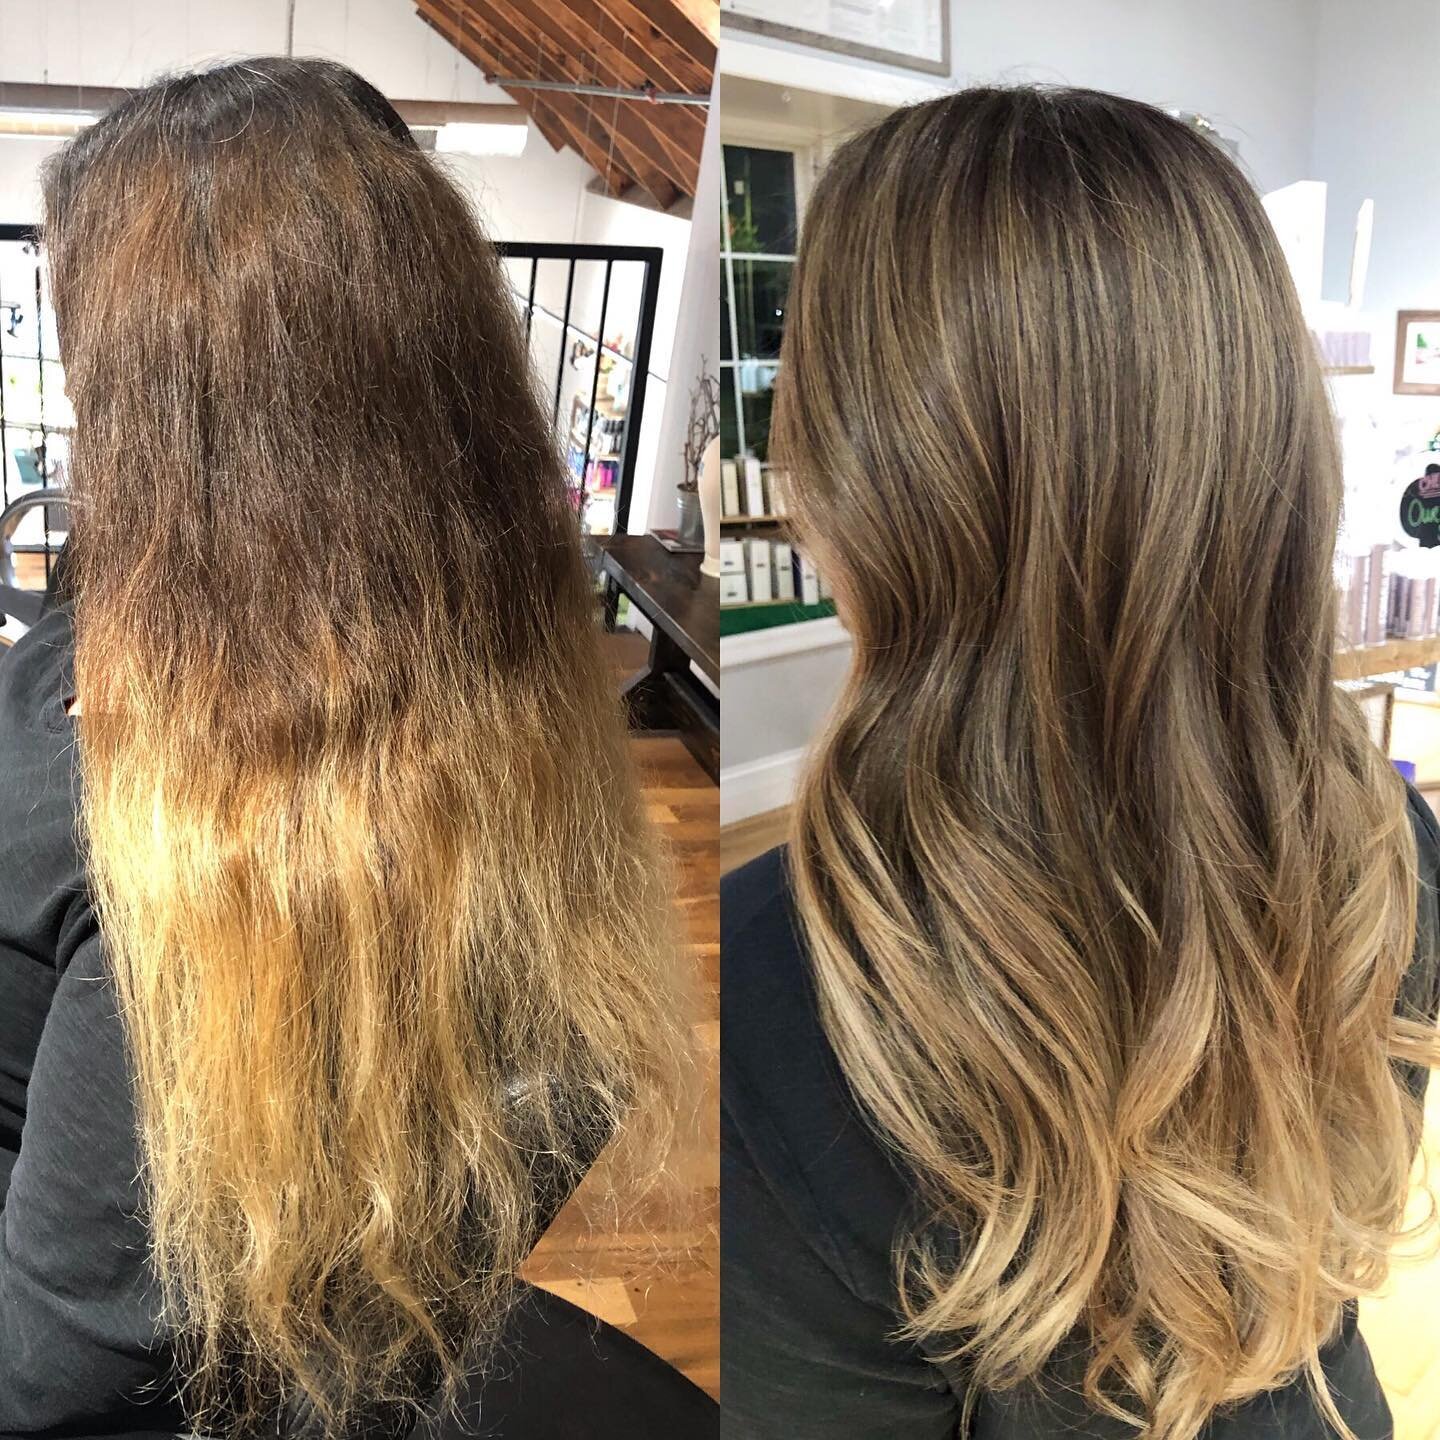 Before and after Beautiful highlights toned with soft, vanilla cream tones. Loved the end result. ❤